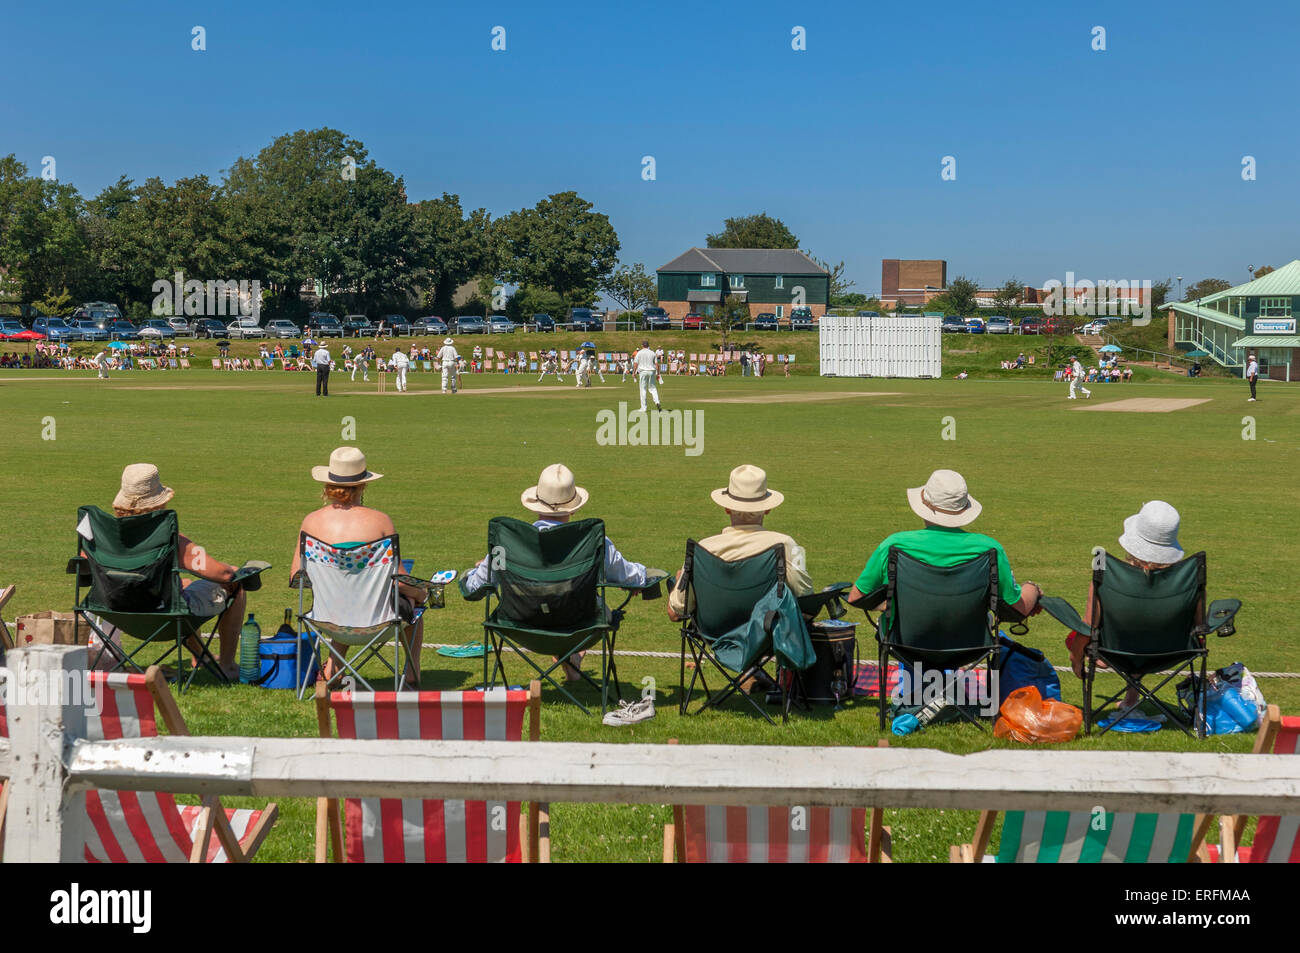 Spectators at a cricket match. Horntye Park, Hastings, East Sussex, England, UK Stock Photo